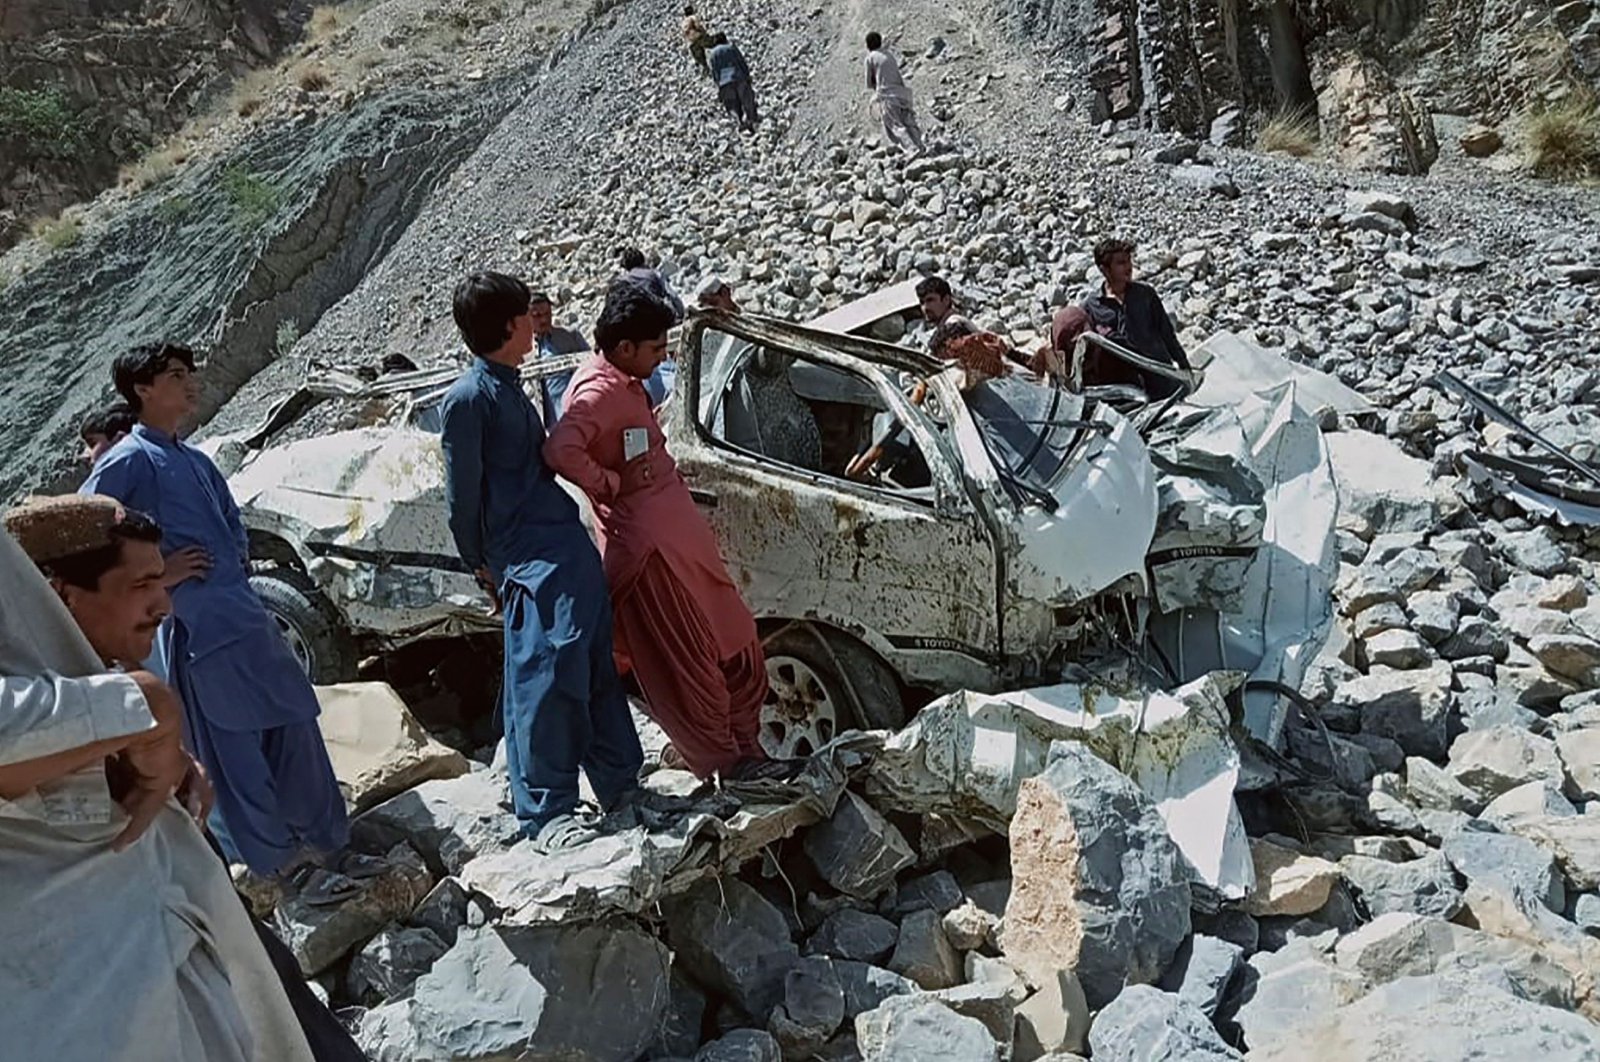 Onlookers gather around the wreckage of a passenger van that plunged into a deep ravine in Qila Saifullah district of Balochistan province, Pakistan, June 8, 2022. (AFP Photo)